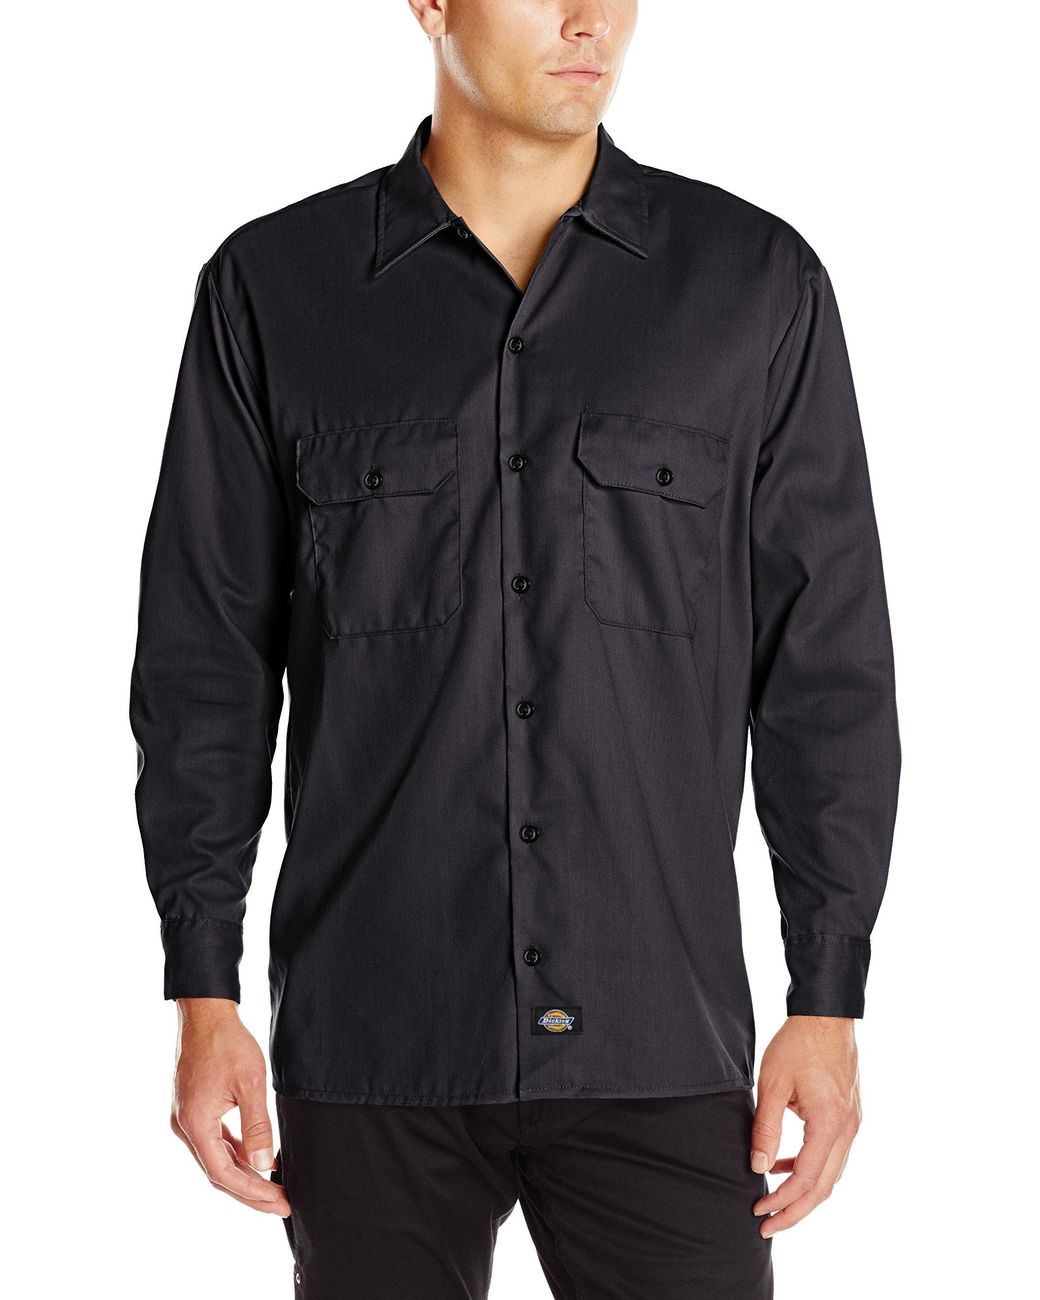 Dickies Long Sleeve Flex Twill Work Shirt in Black for Men - Save 21% ...